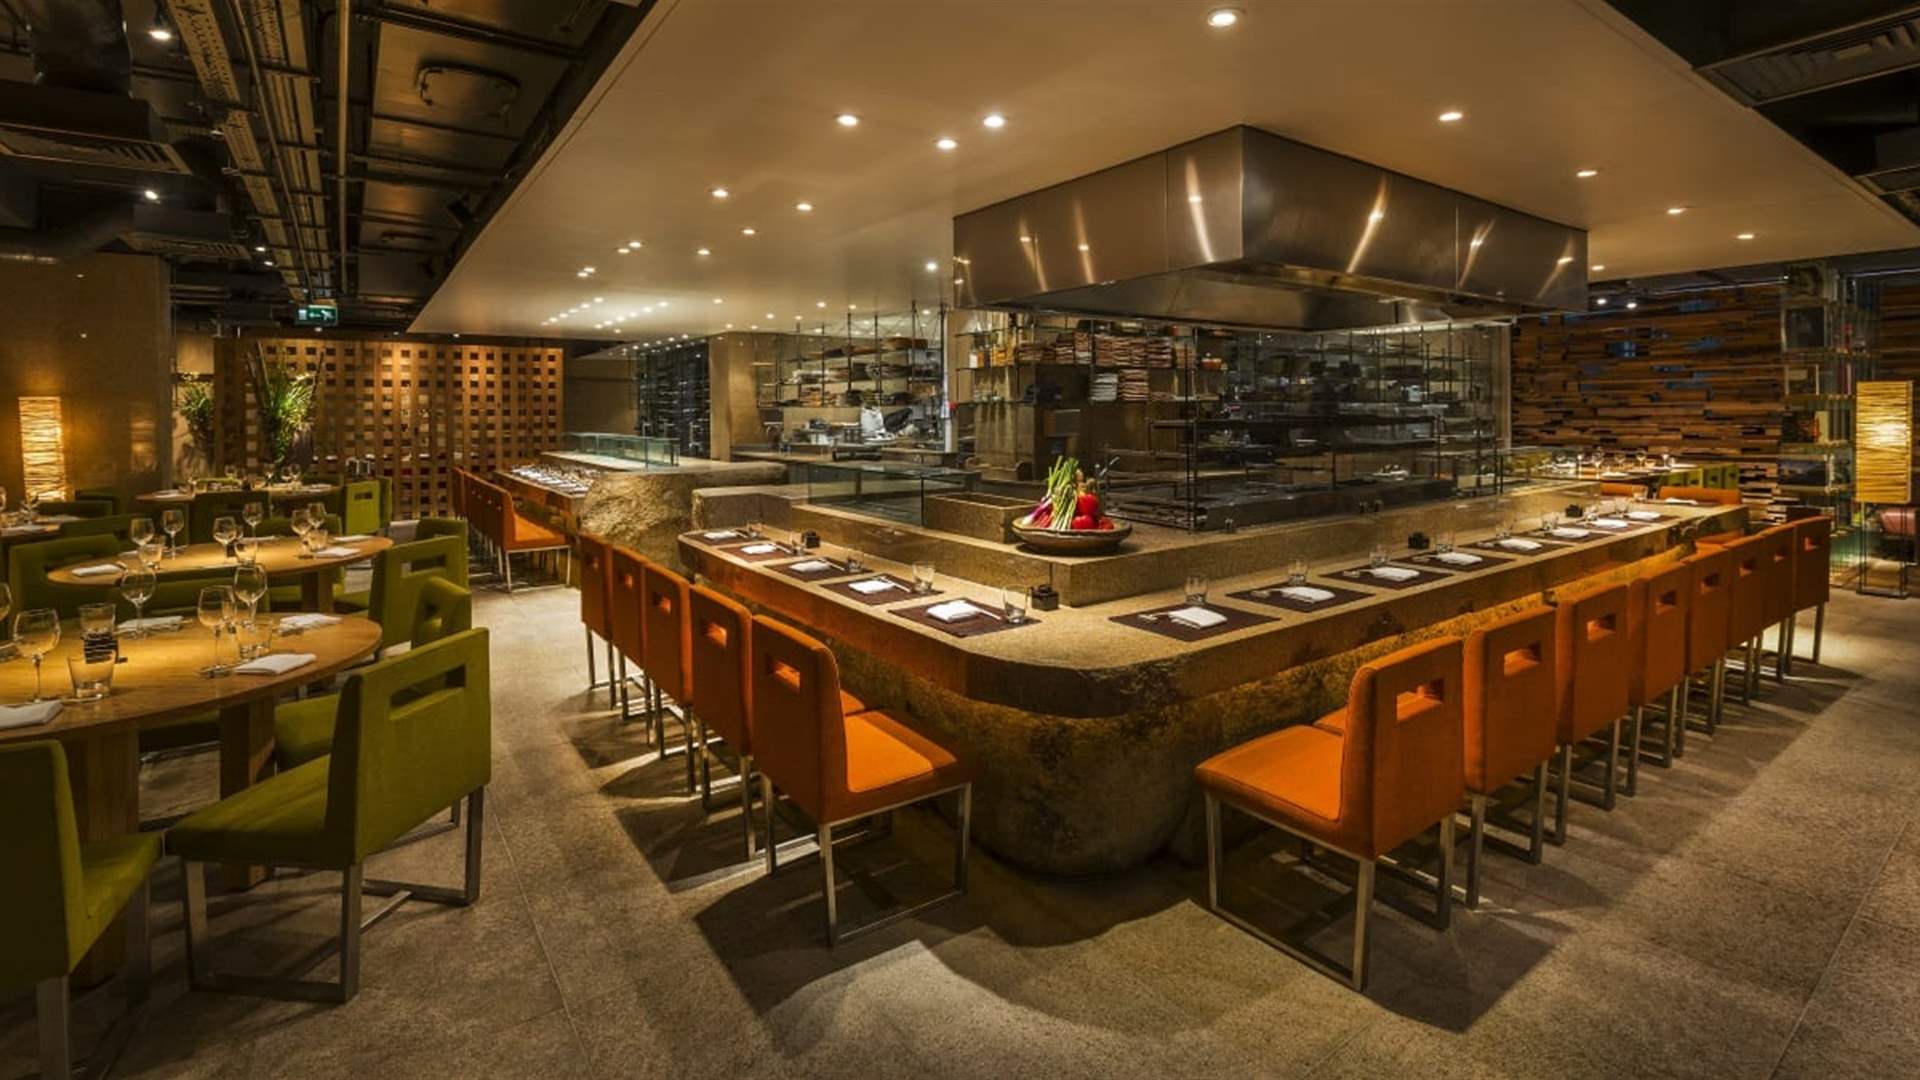 Zuma Restaurant group debunks rumors of Lebanon expansion, takes legal action to defend brand integrity